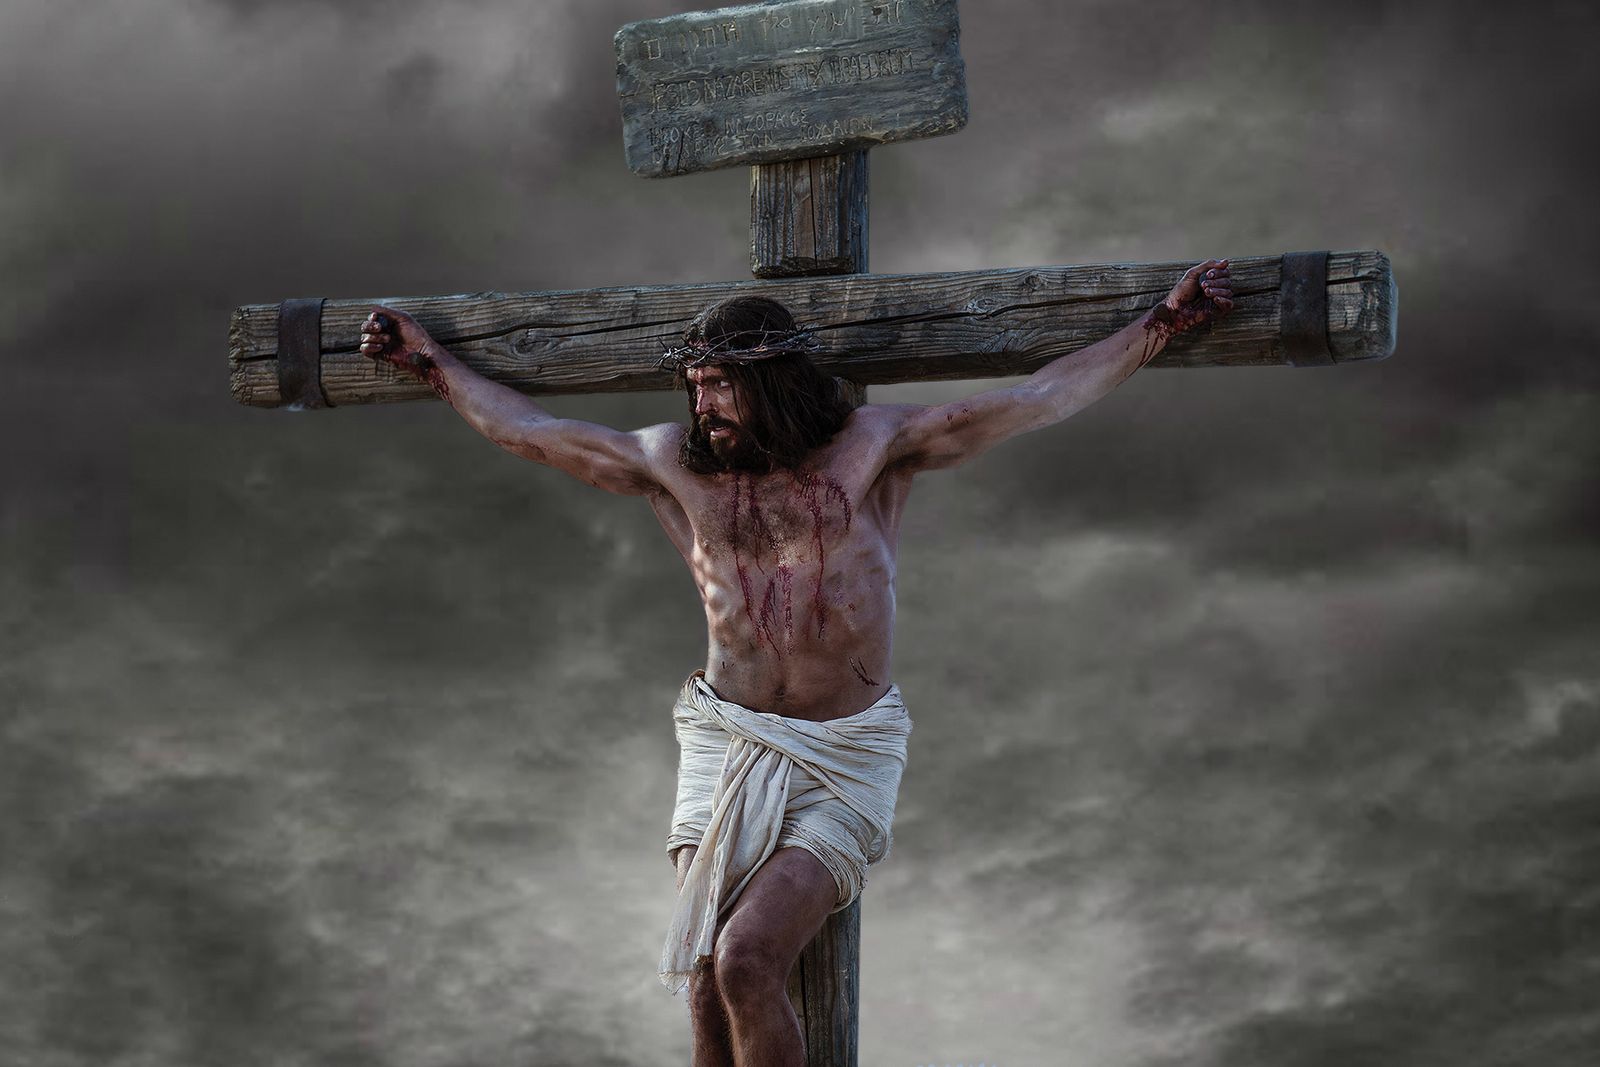 Jesus prays to the Father as He is nailed up on the cross.